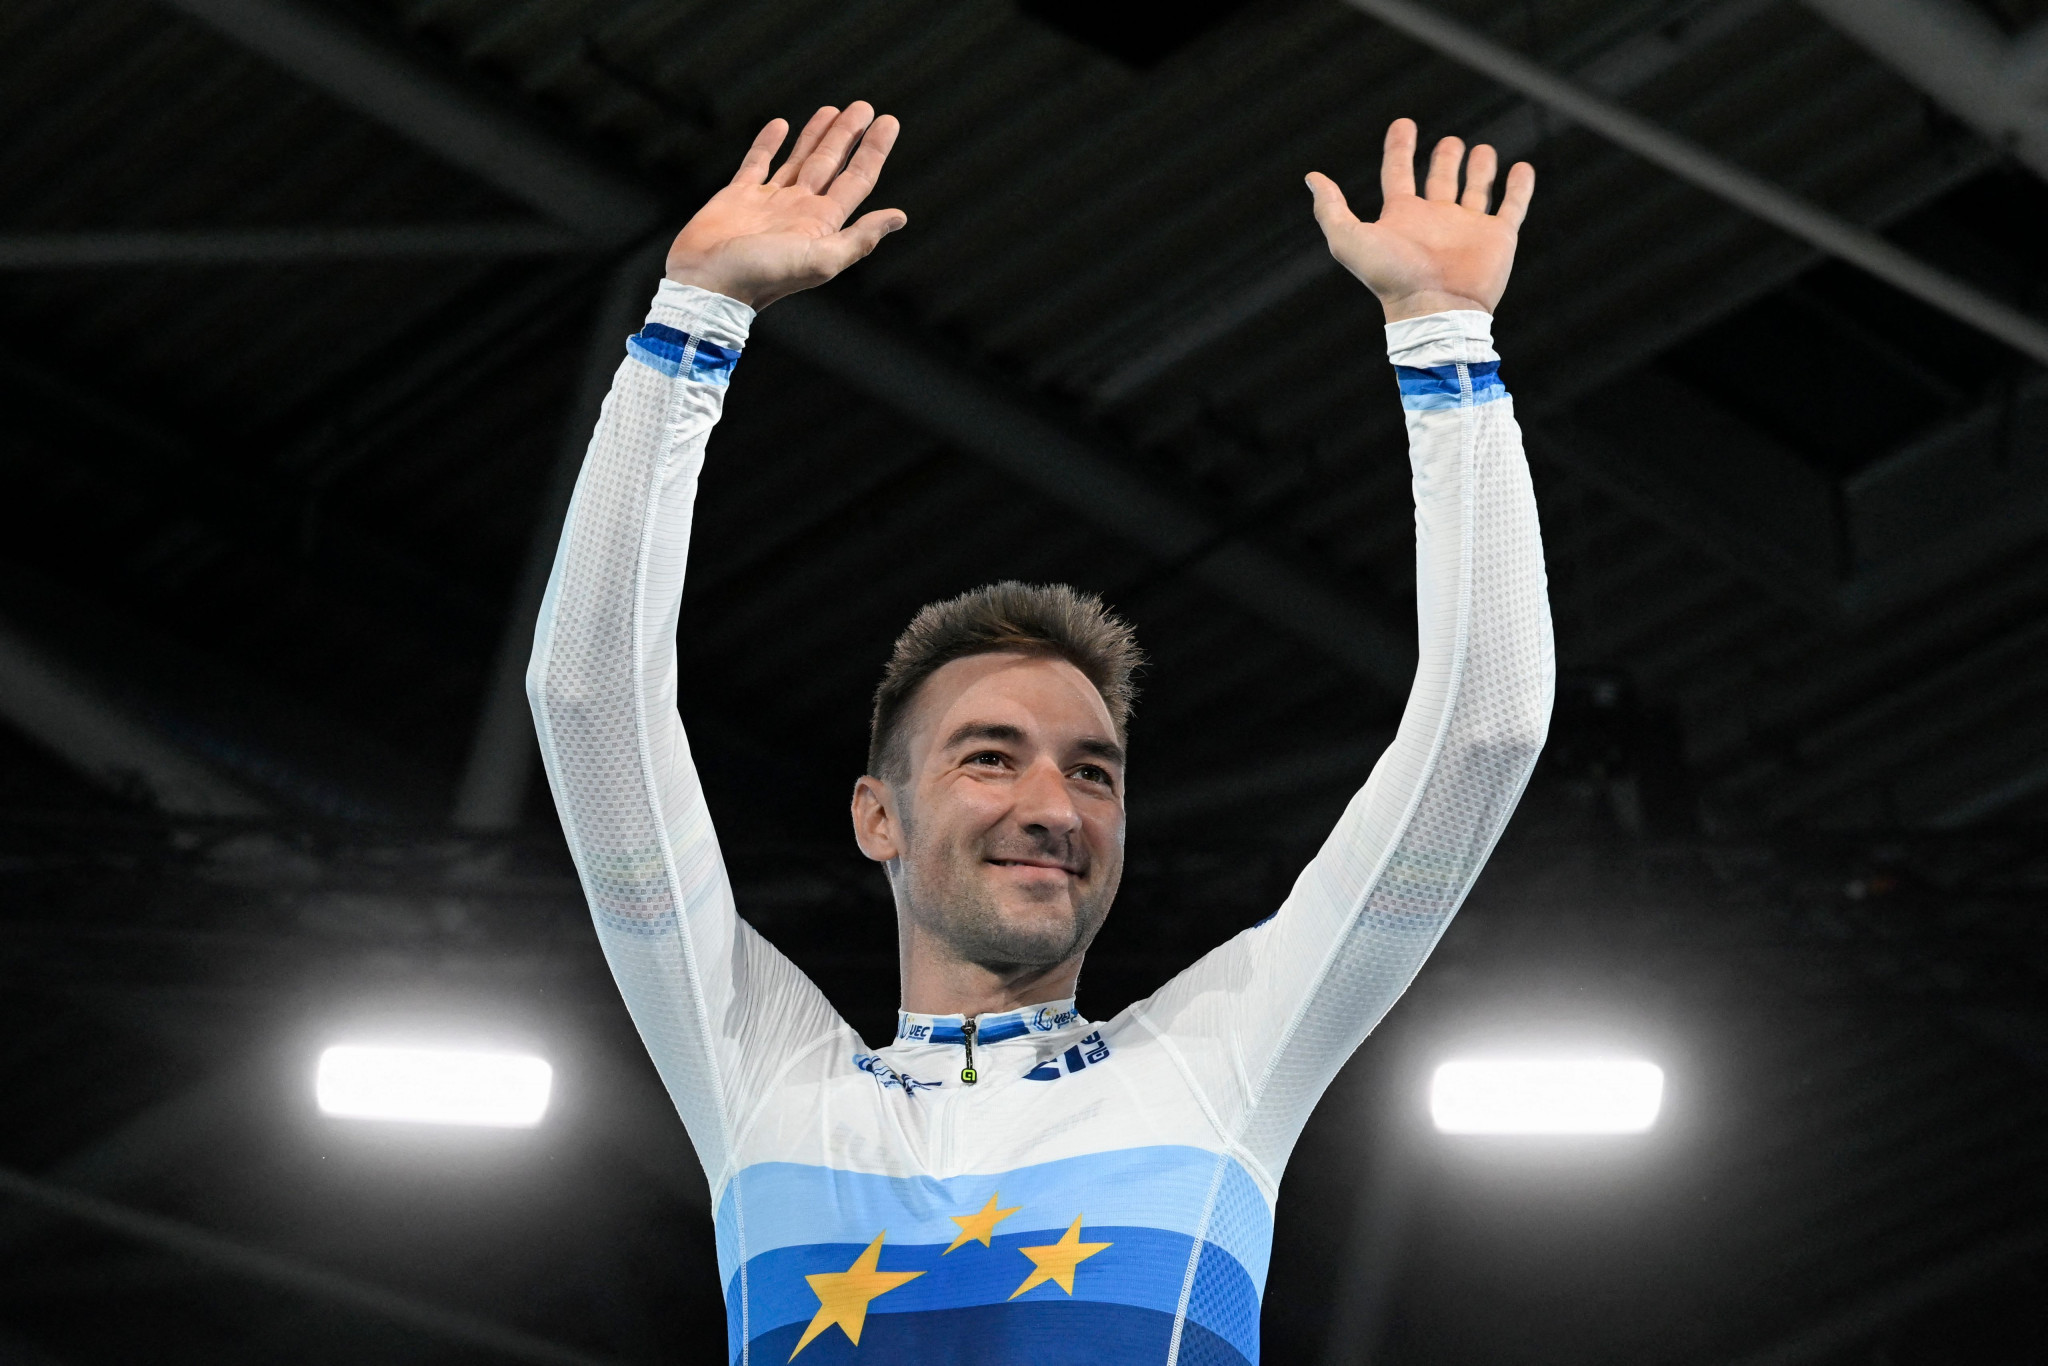 Viviani wins elimination race on track at European Championships after road race